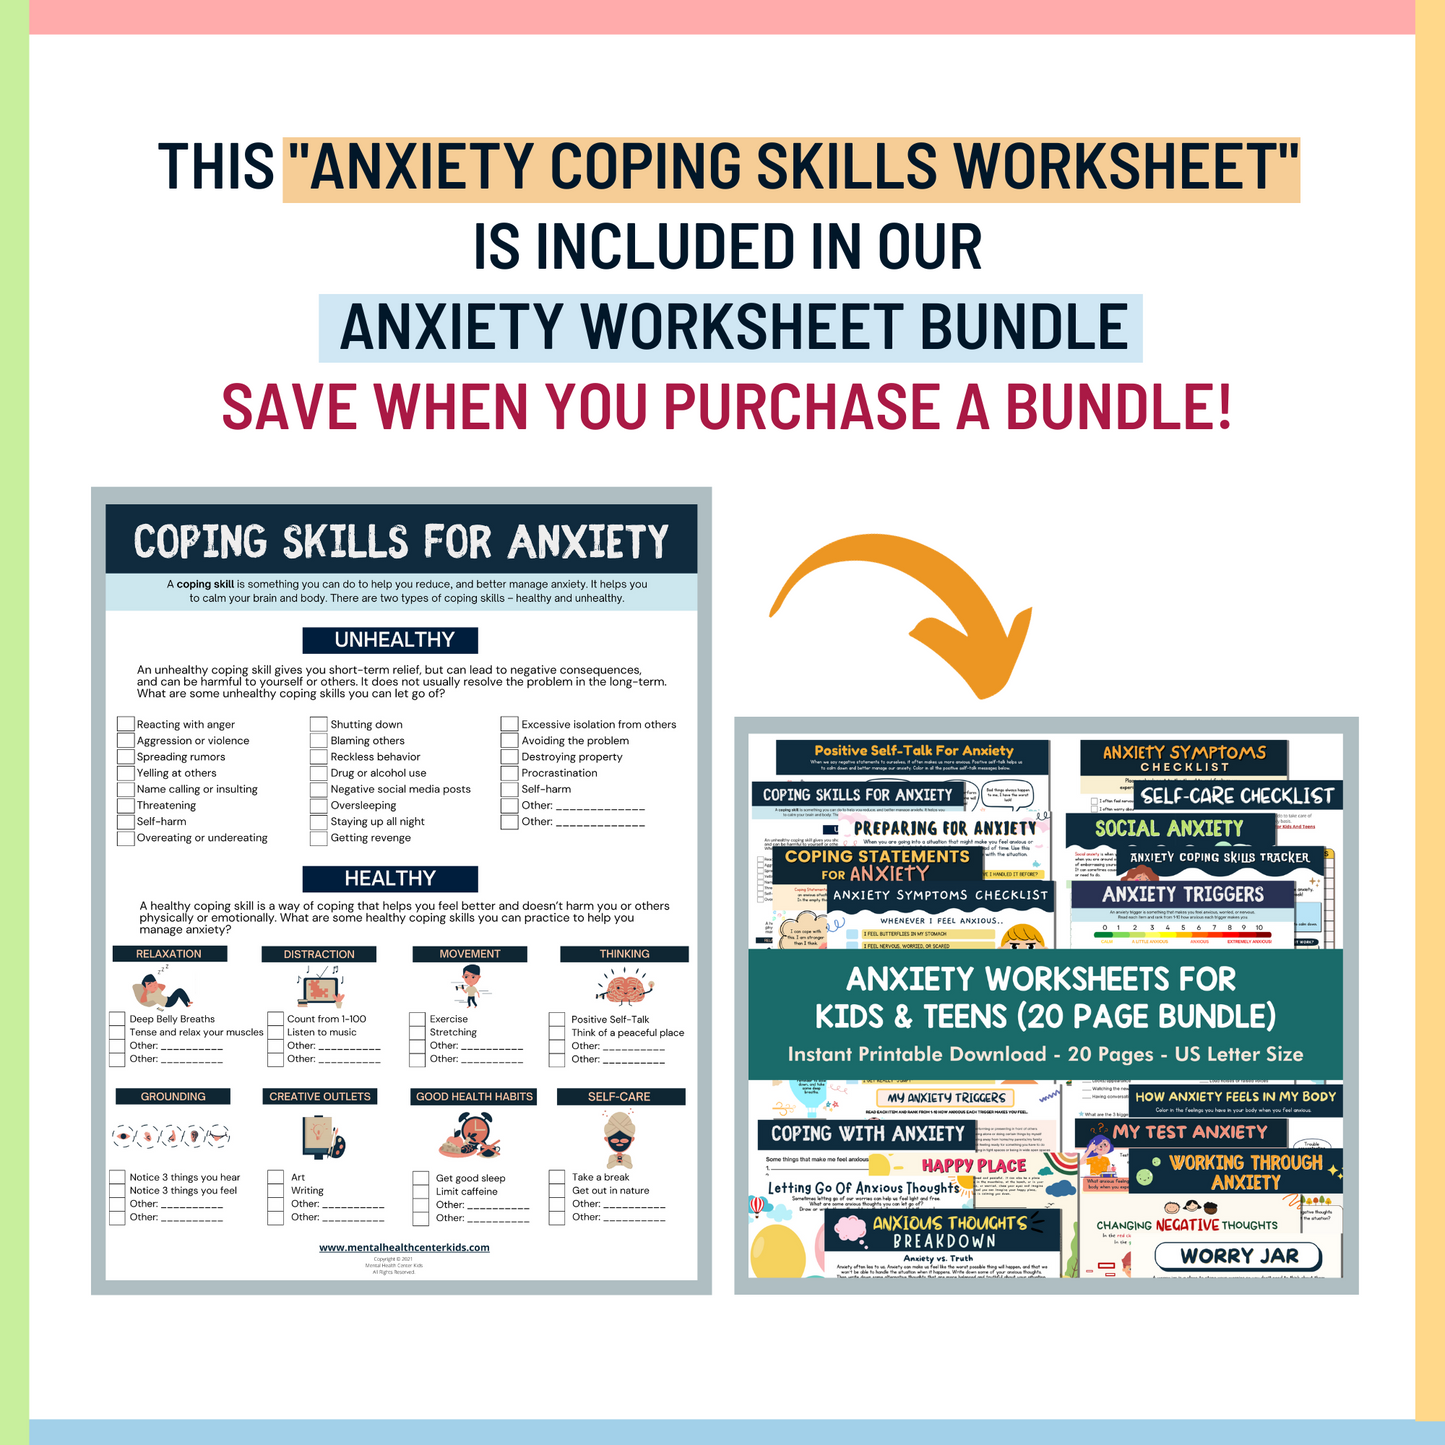 Coping Skills for Anxiety